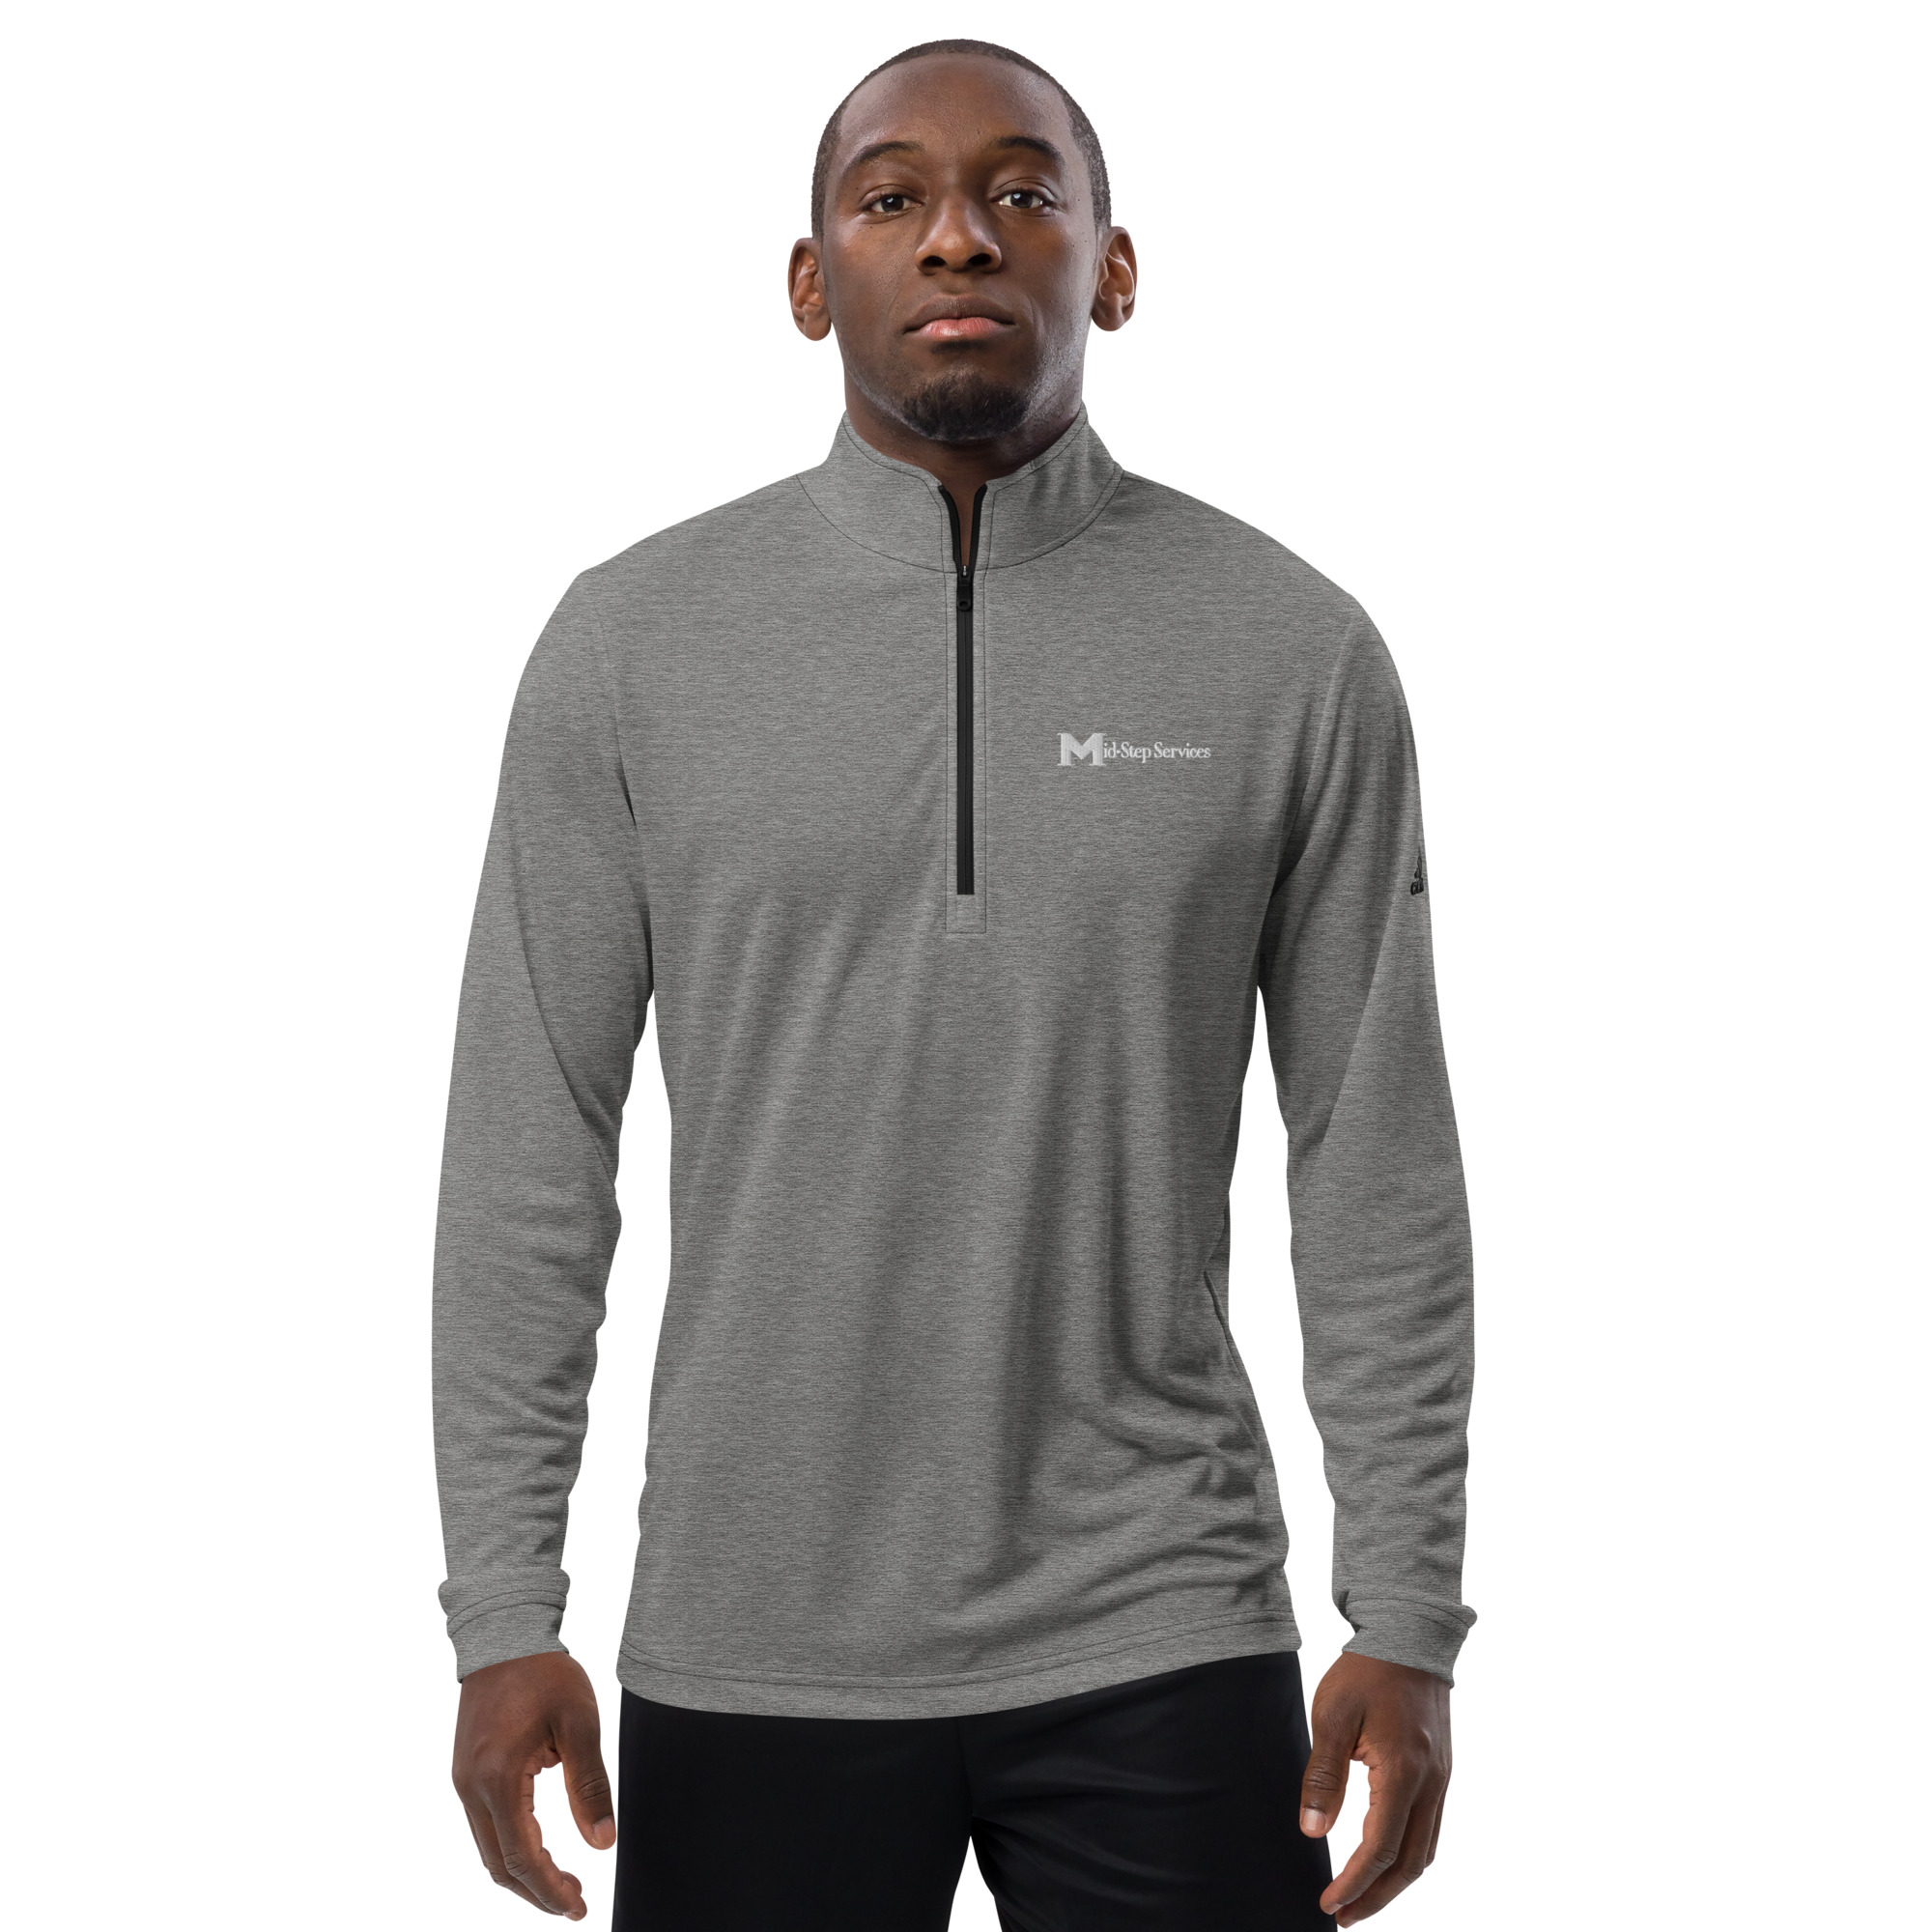 Adidas Quarter zip pullover – EMBROIDERED – Midstep Services